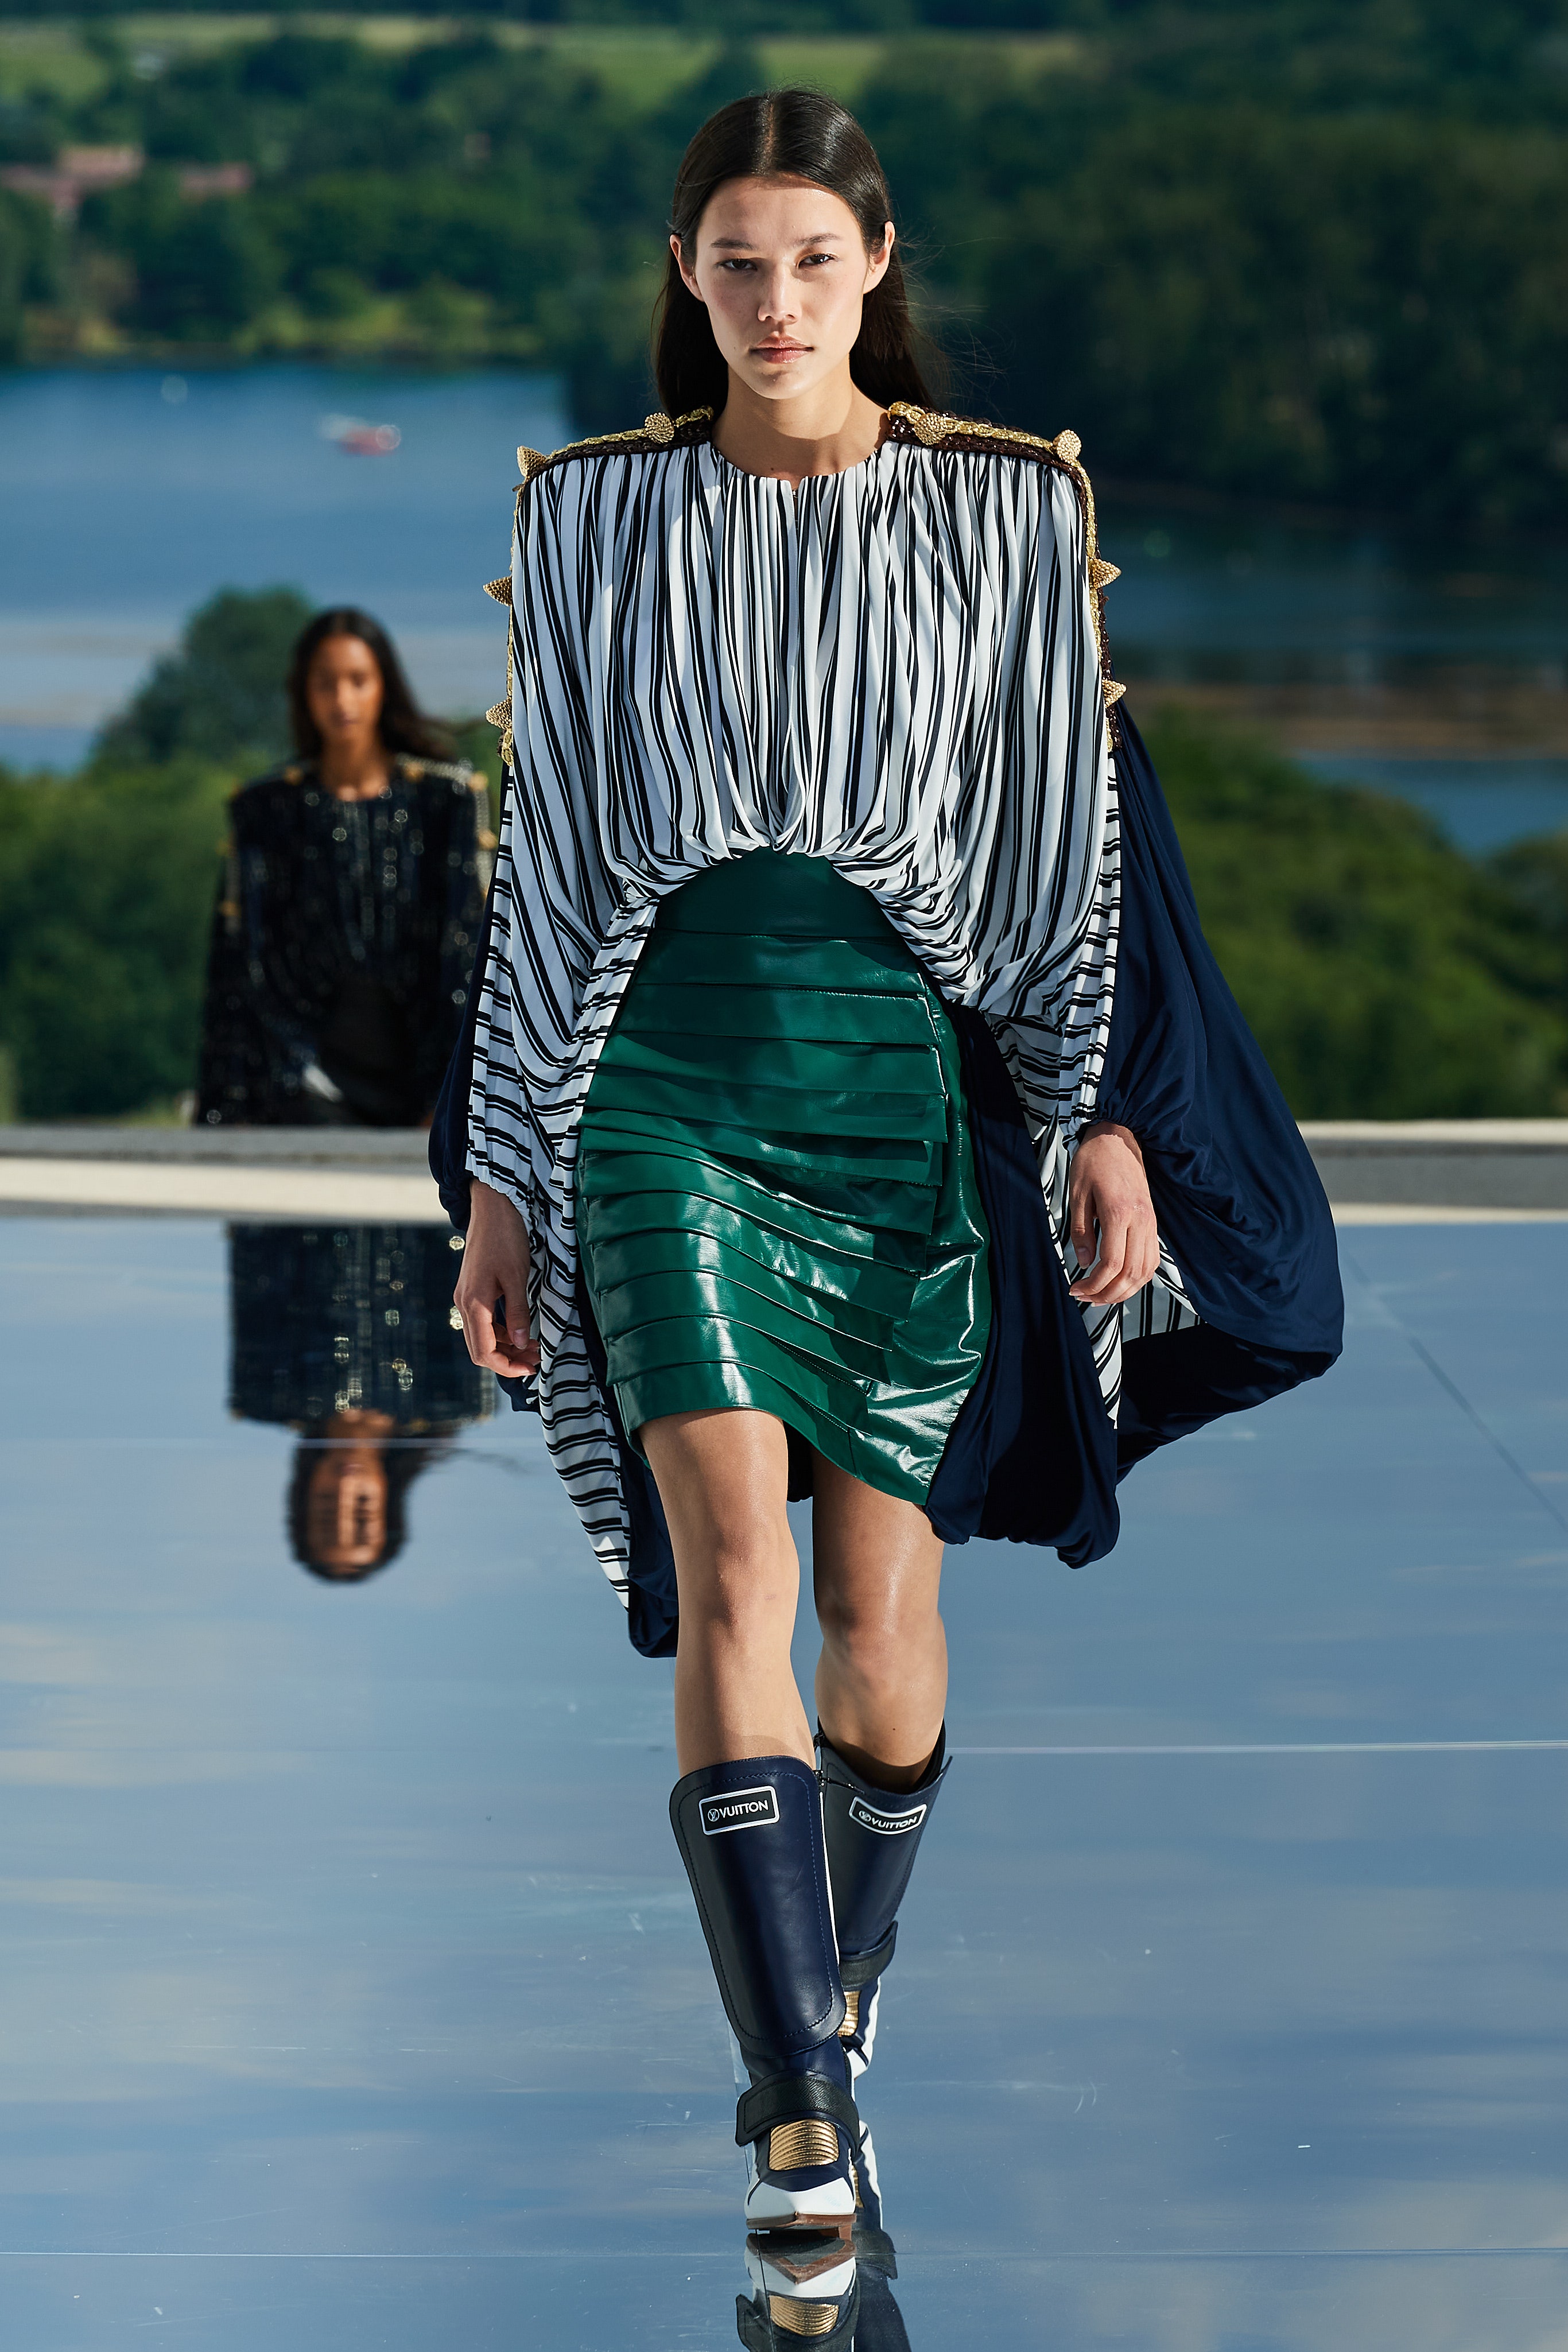 Louis Vuitton Cruise 2022: a passport to the future - The Face